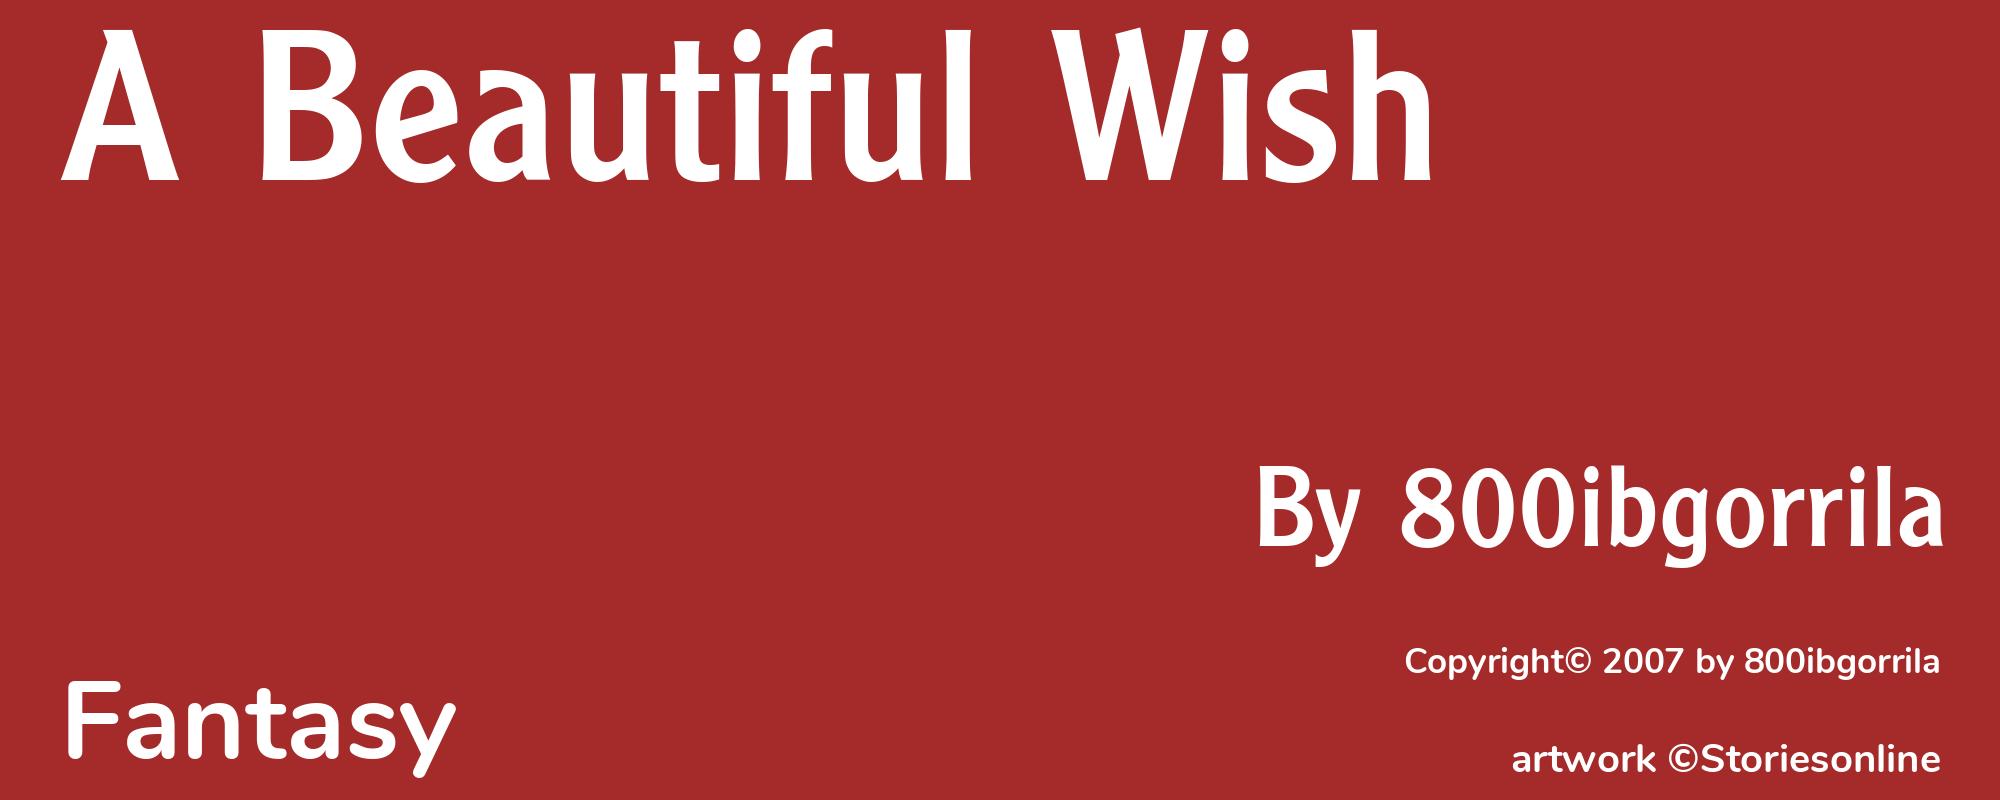 A Beautiful Wish - Cover